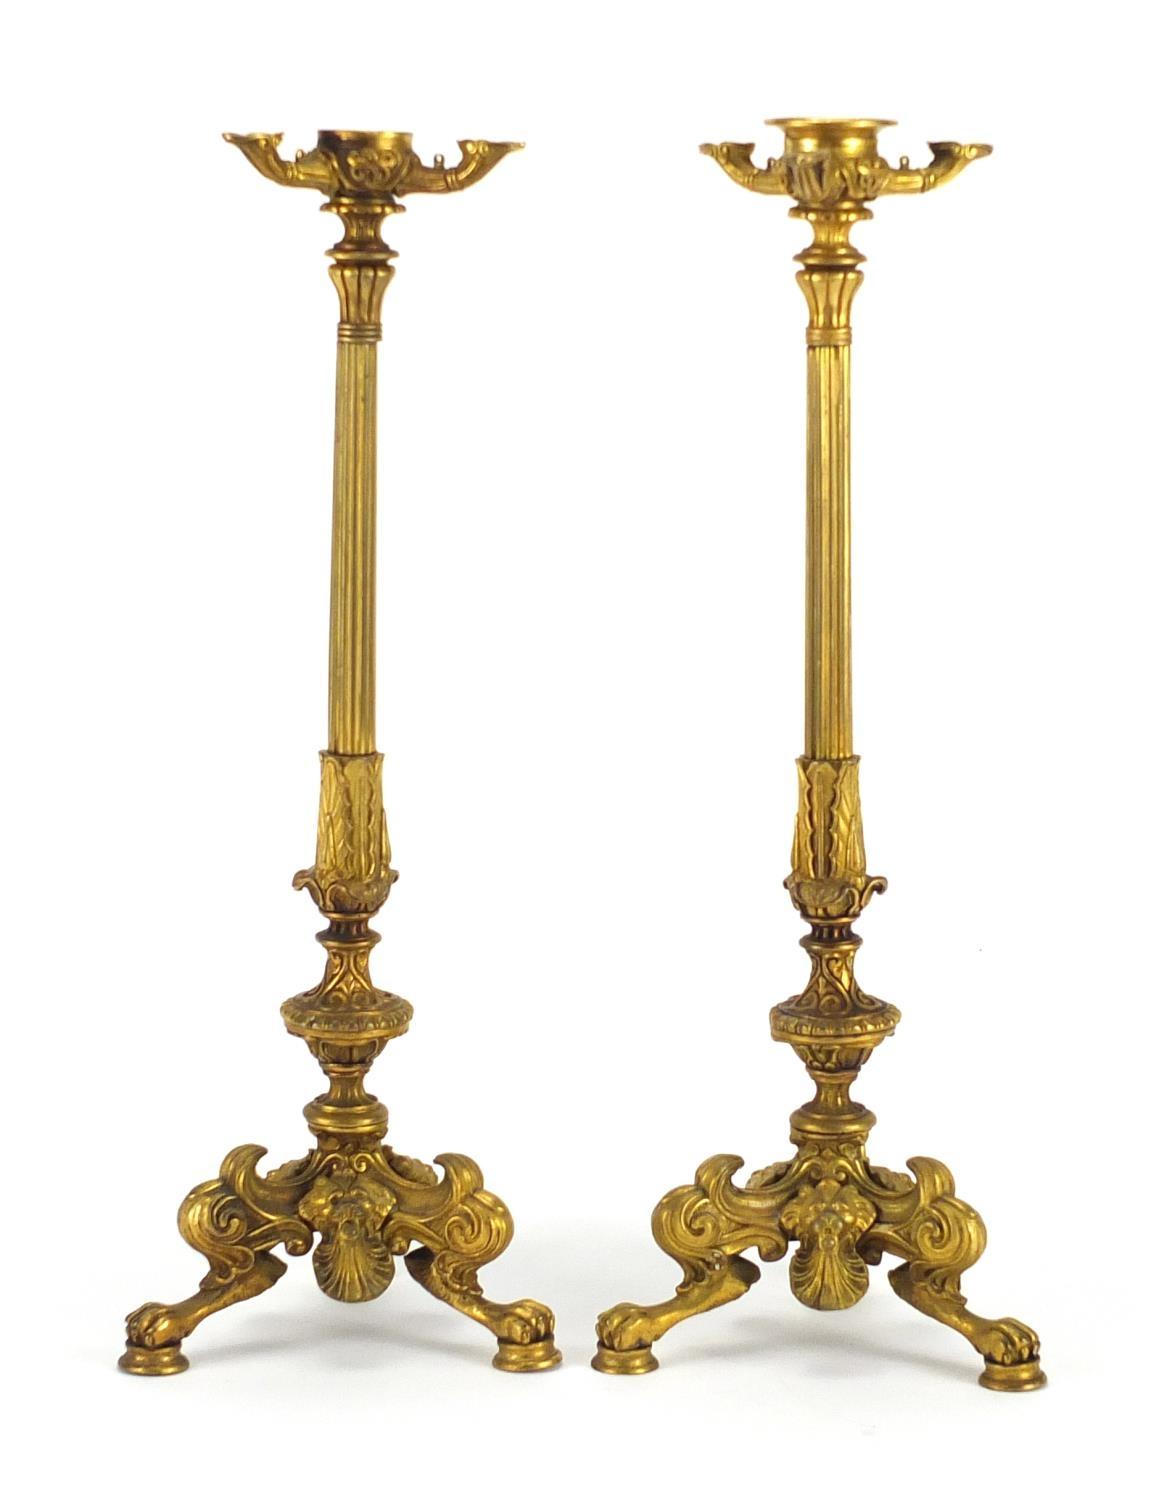 Pair of 19th century ormolu candlesticks with reeded columns, lion masks and claw feet, each 34. - Image 2 of 6